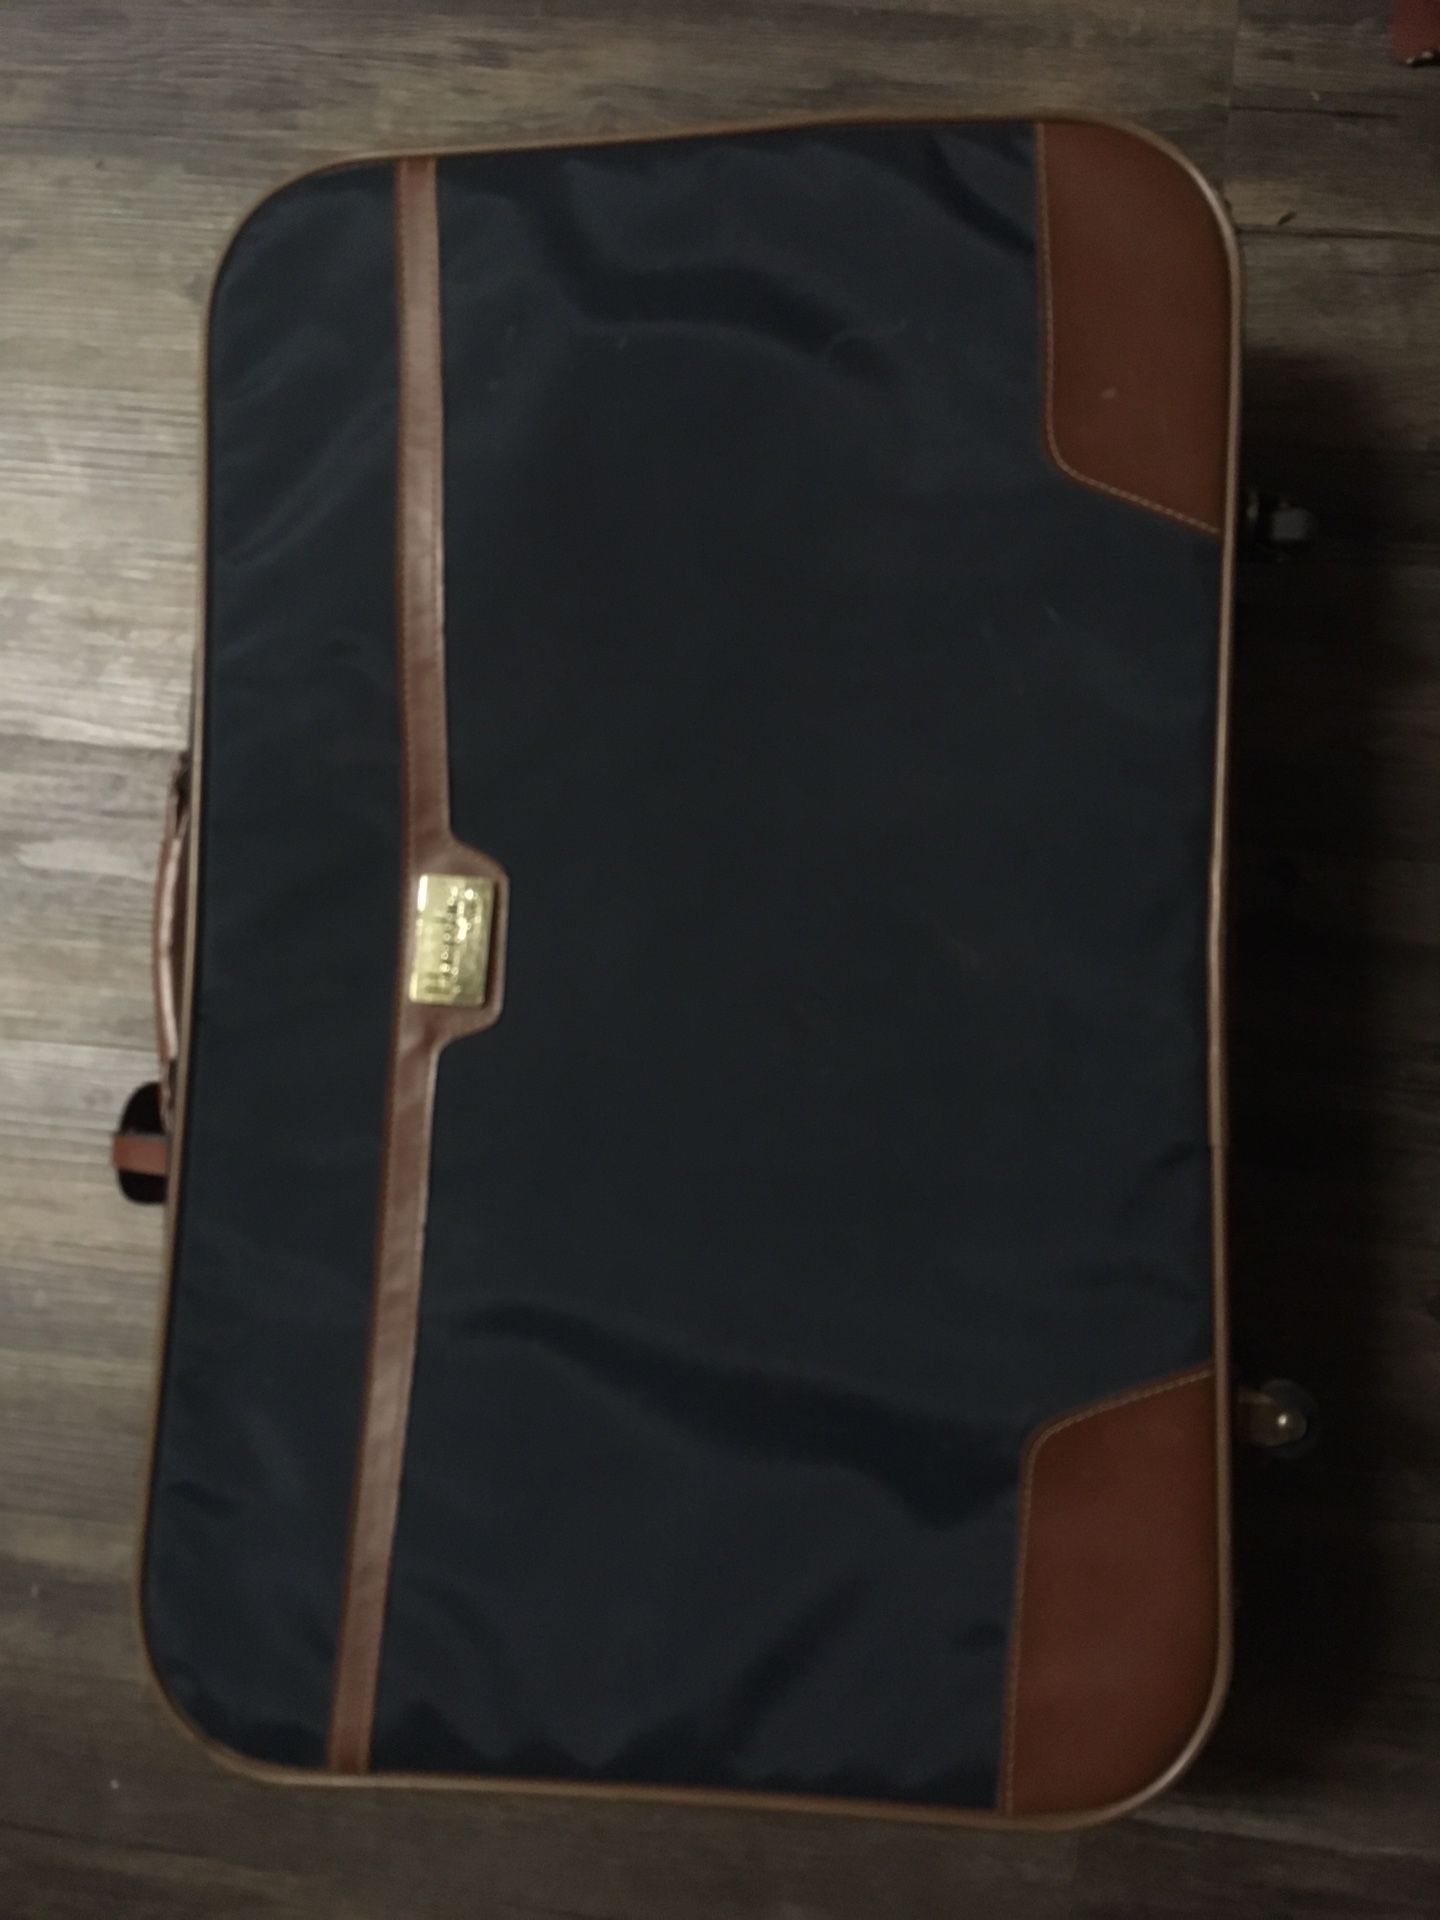 Gently used luggage - good condition